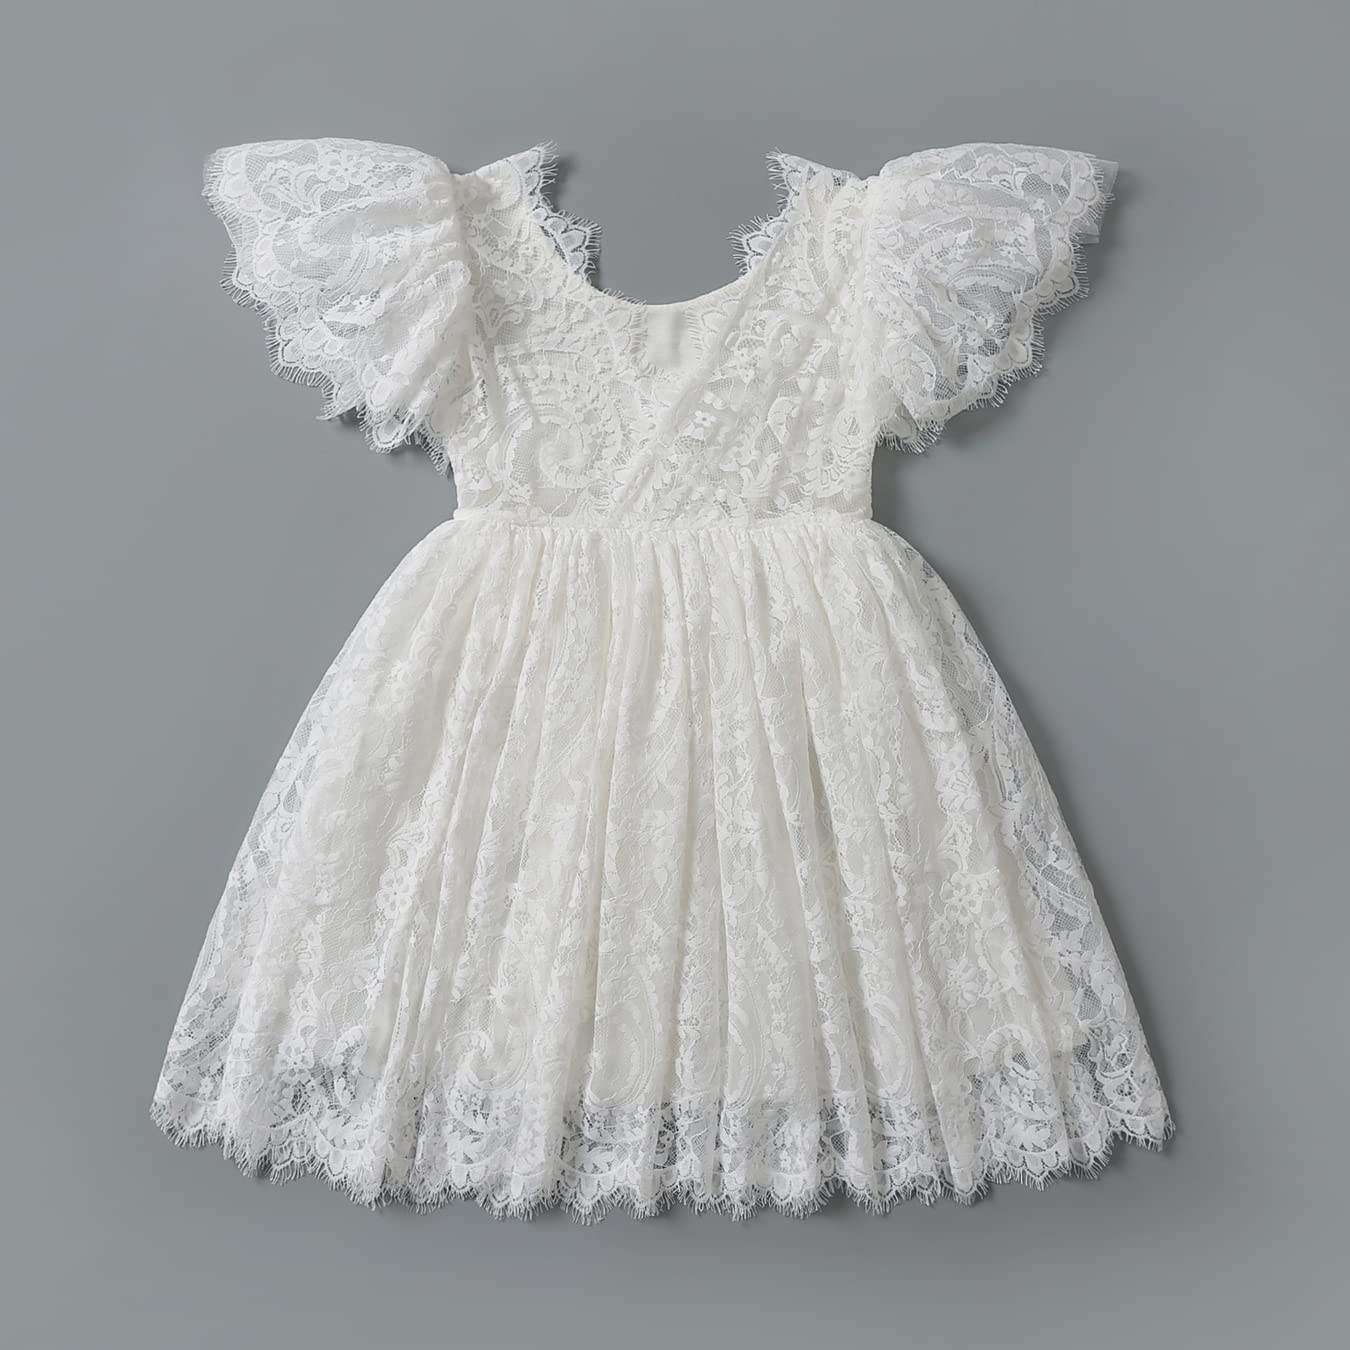 2Bunnies Flower Girl Dress Paisley Lace Back A-Line Flutter Sleeve Straight All Lace Knee (White) - 2BUNNIES